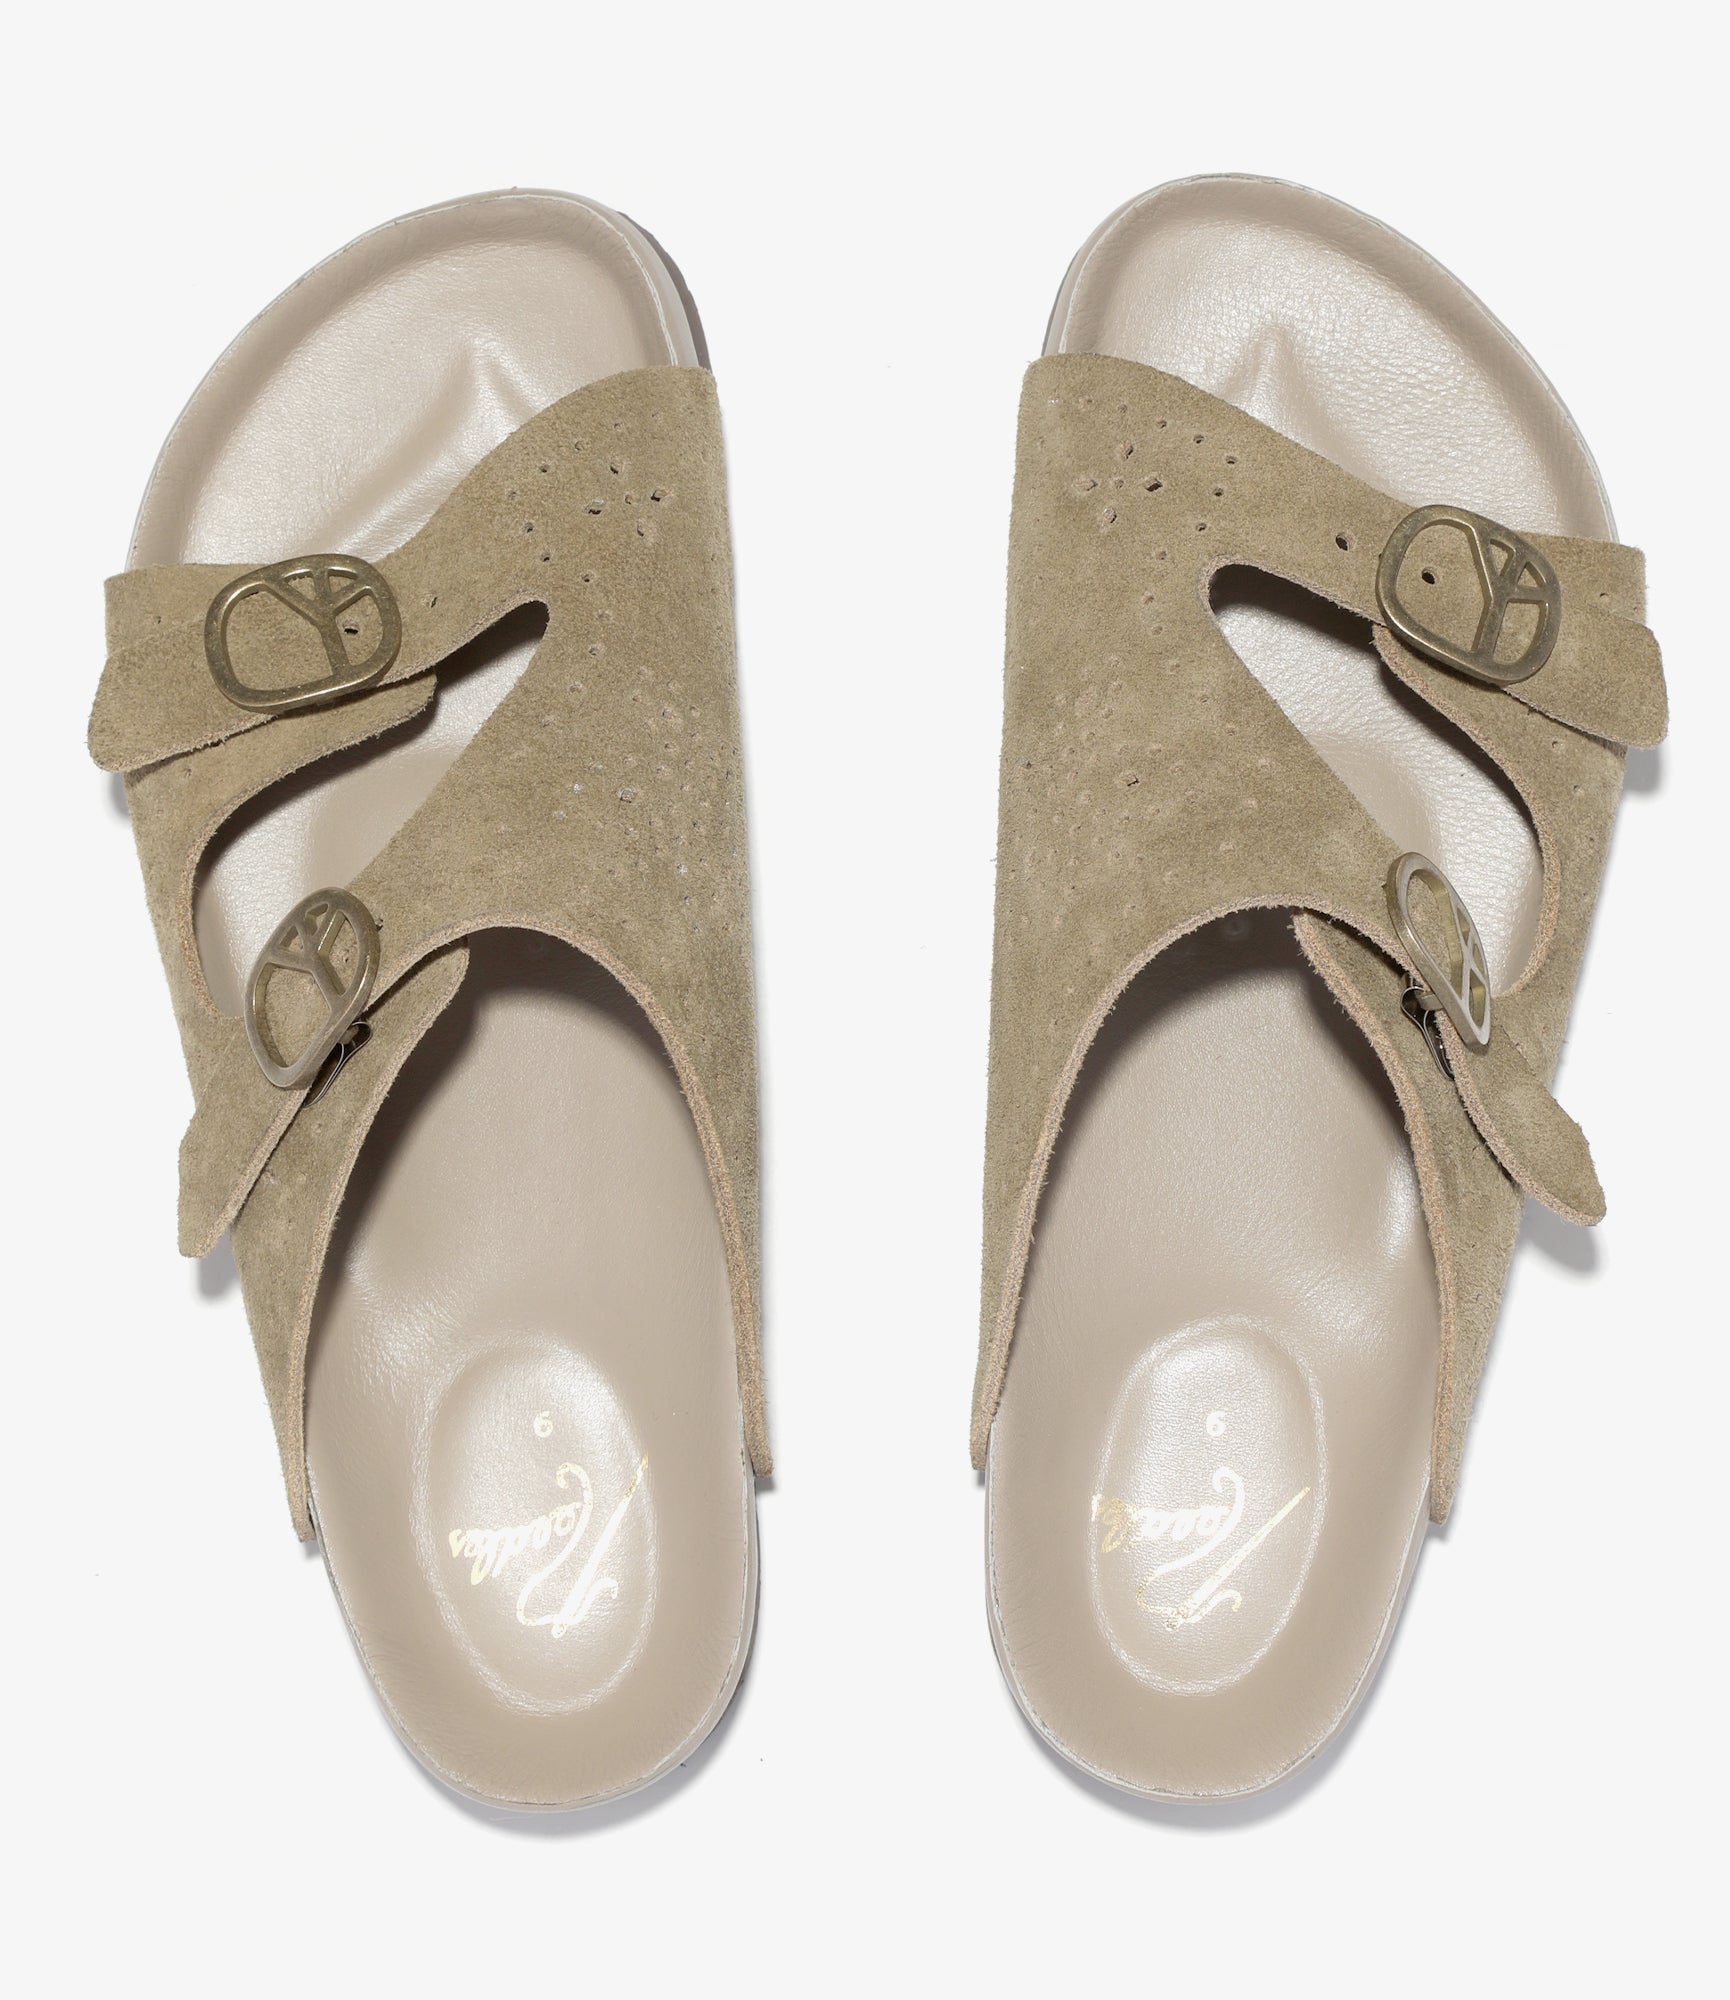 Double Strap Sandal - Taupe - Suede Leather